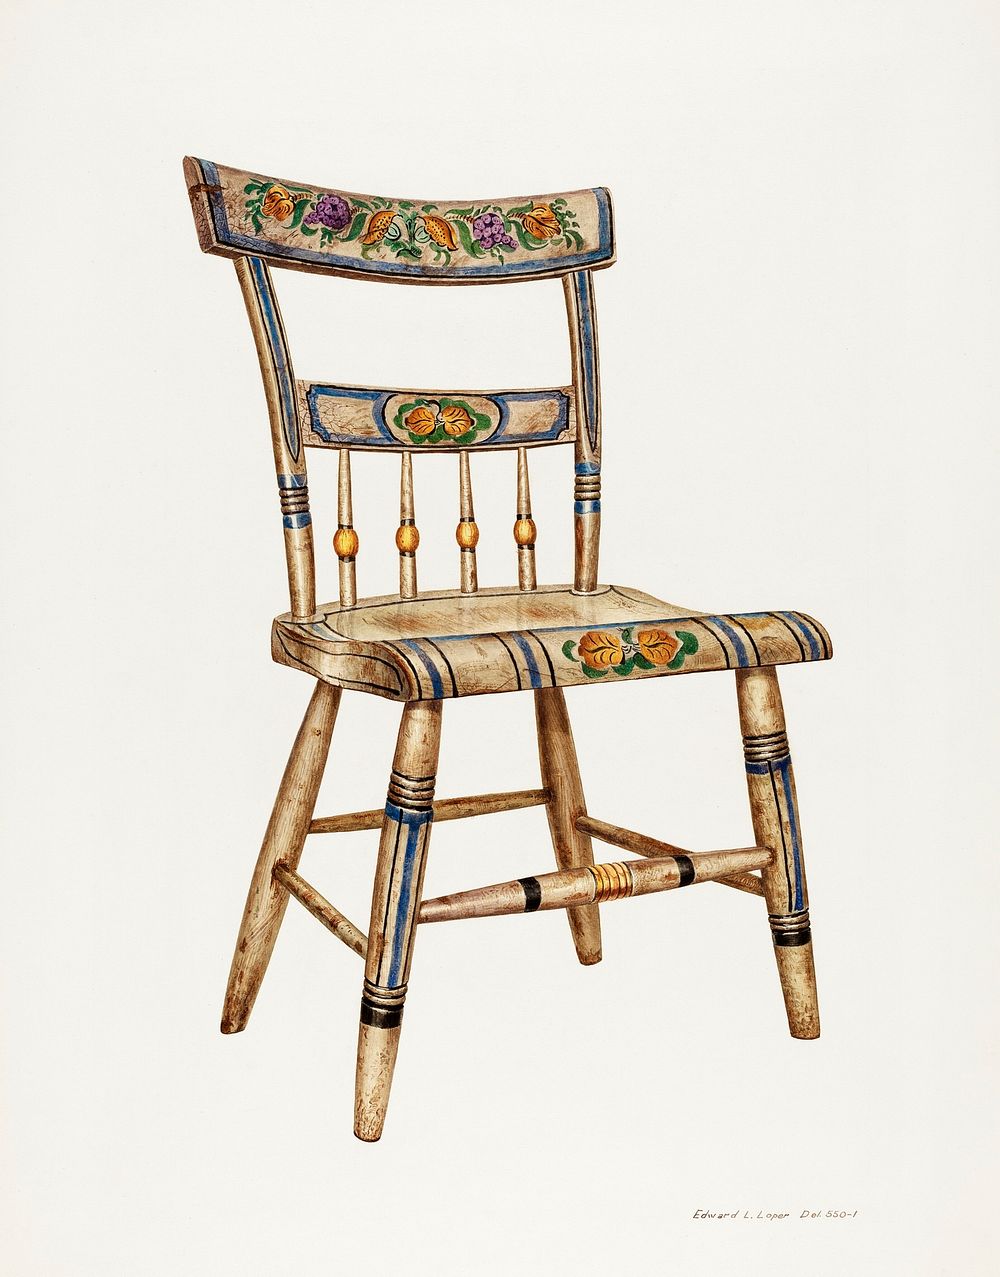 German Chair (1937) by Edward L. Loper. Original from The National Gallery of Art. Digitally enhanced by rawpixel.